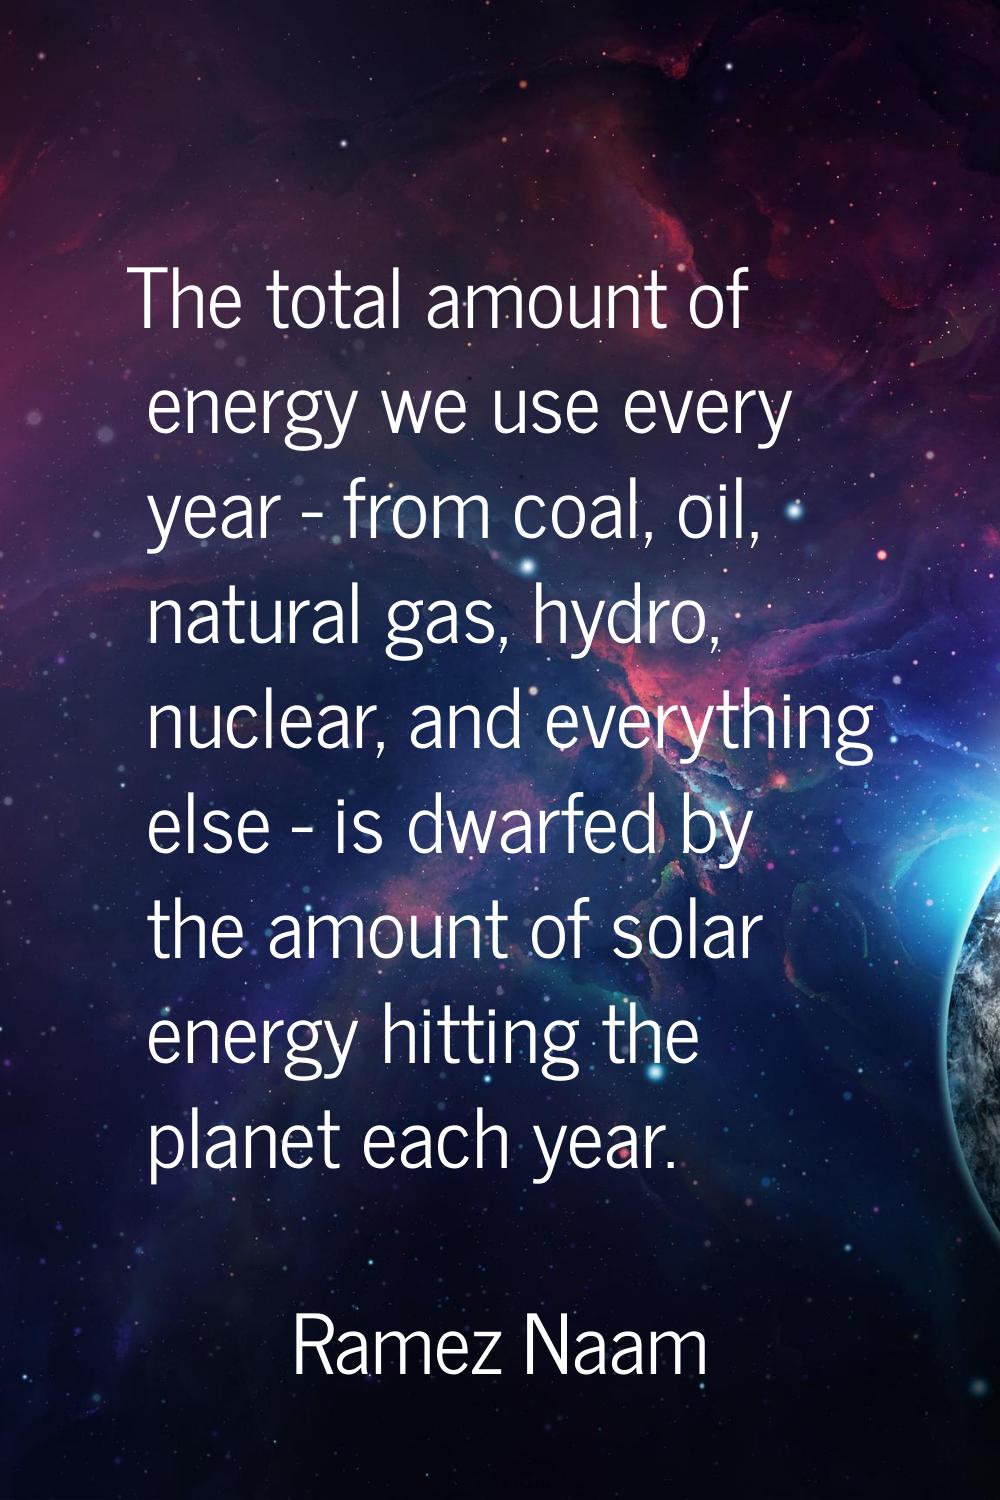 The total amount of energy we use every year - from coal, oil, natural gas, hydro, nuclear, and eve